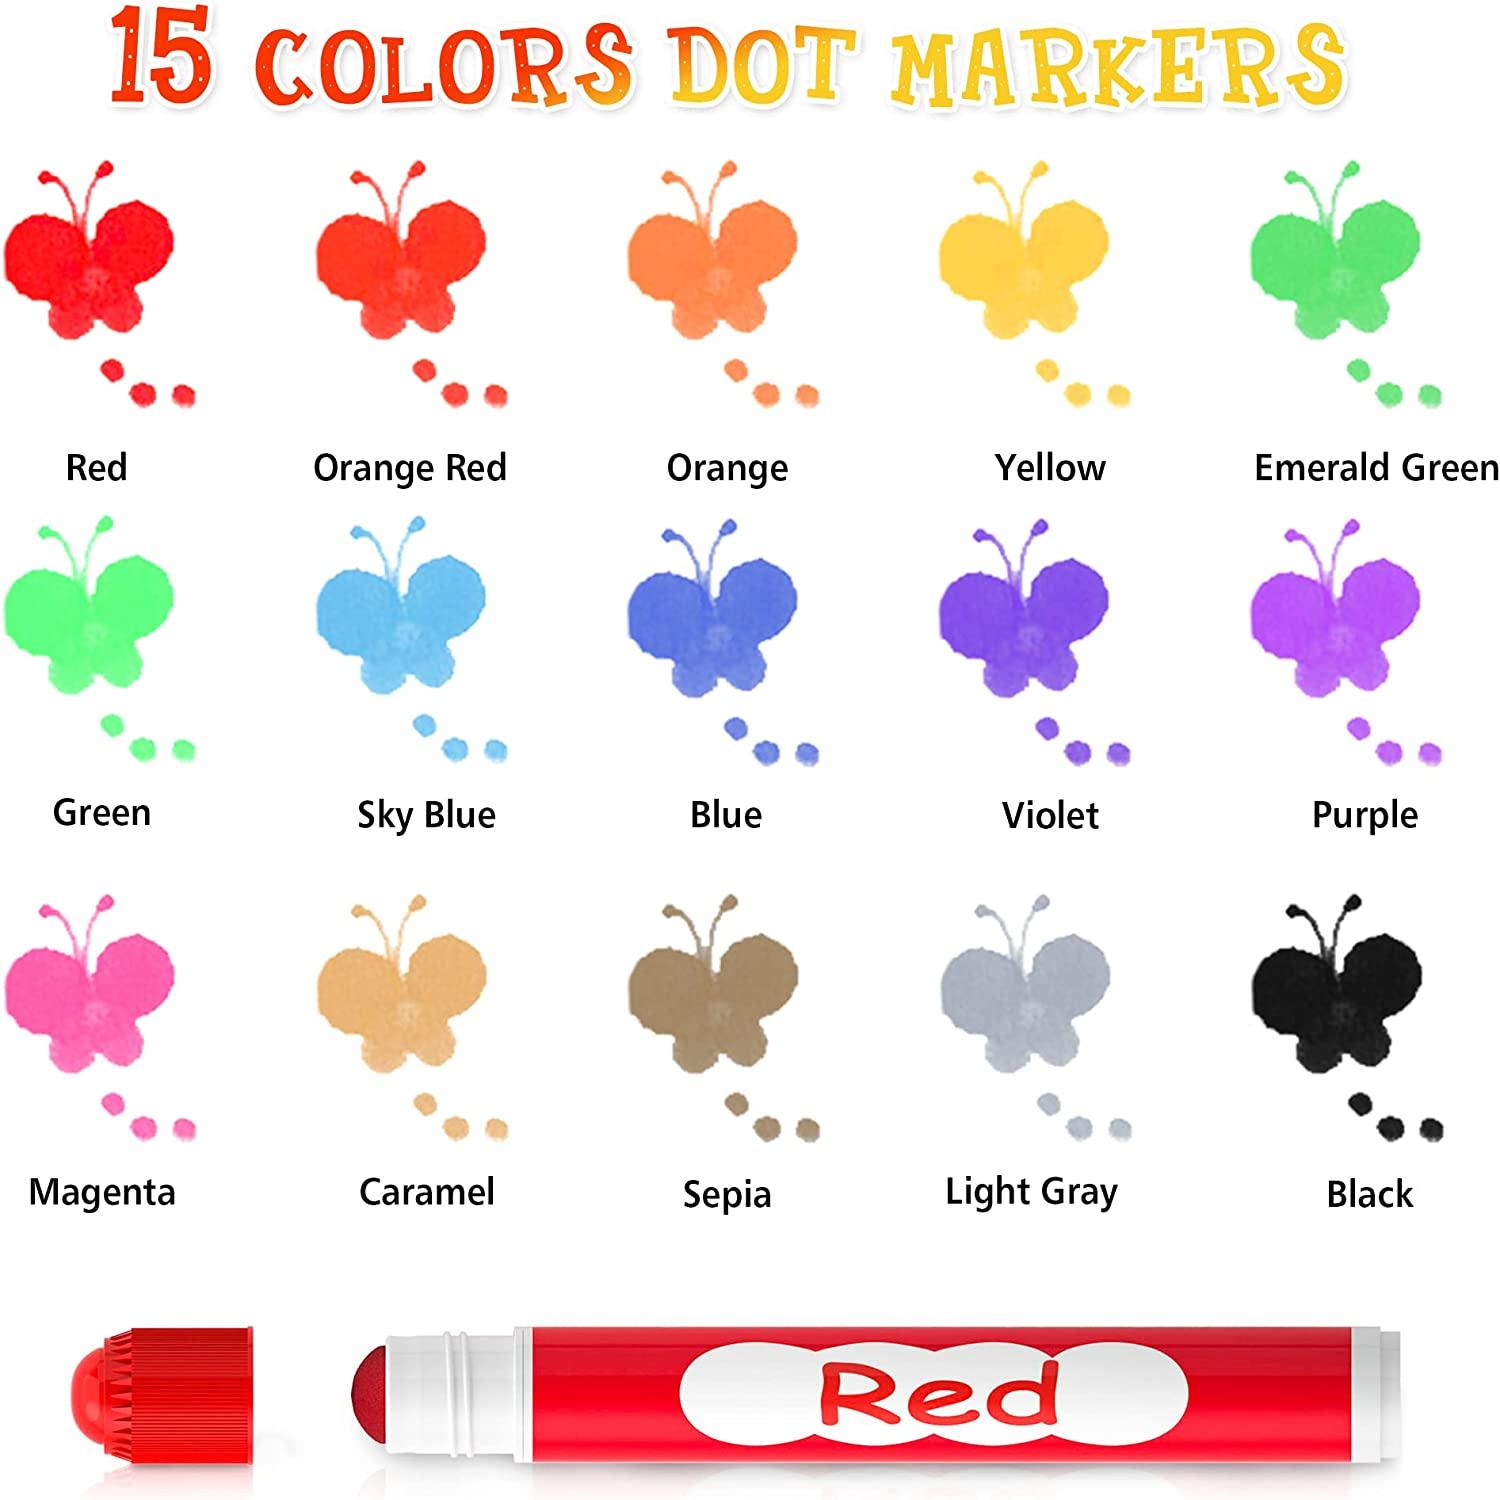 BYJ KIDDY COLOR Washable Colored Markers Set Art Supply for Kids